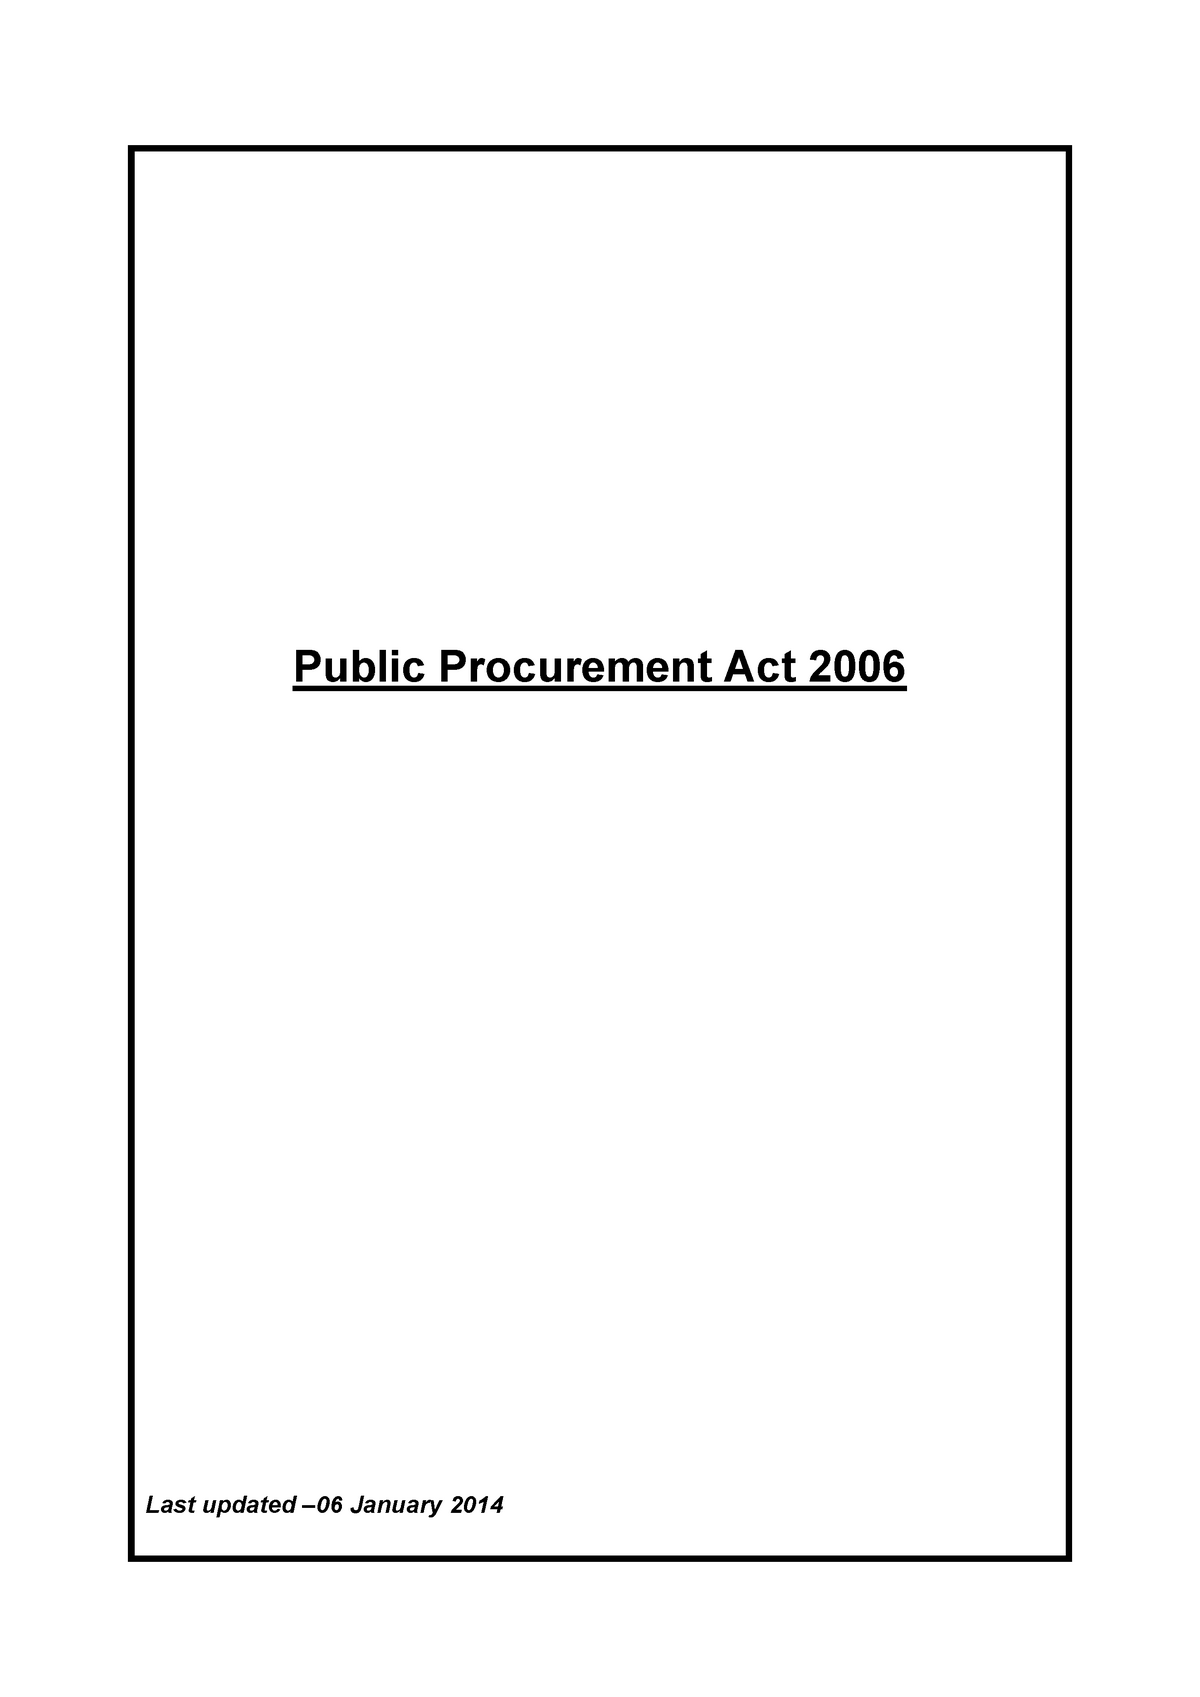 Public Procurement Act 2006 Public Procurement Act Last updated 06